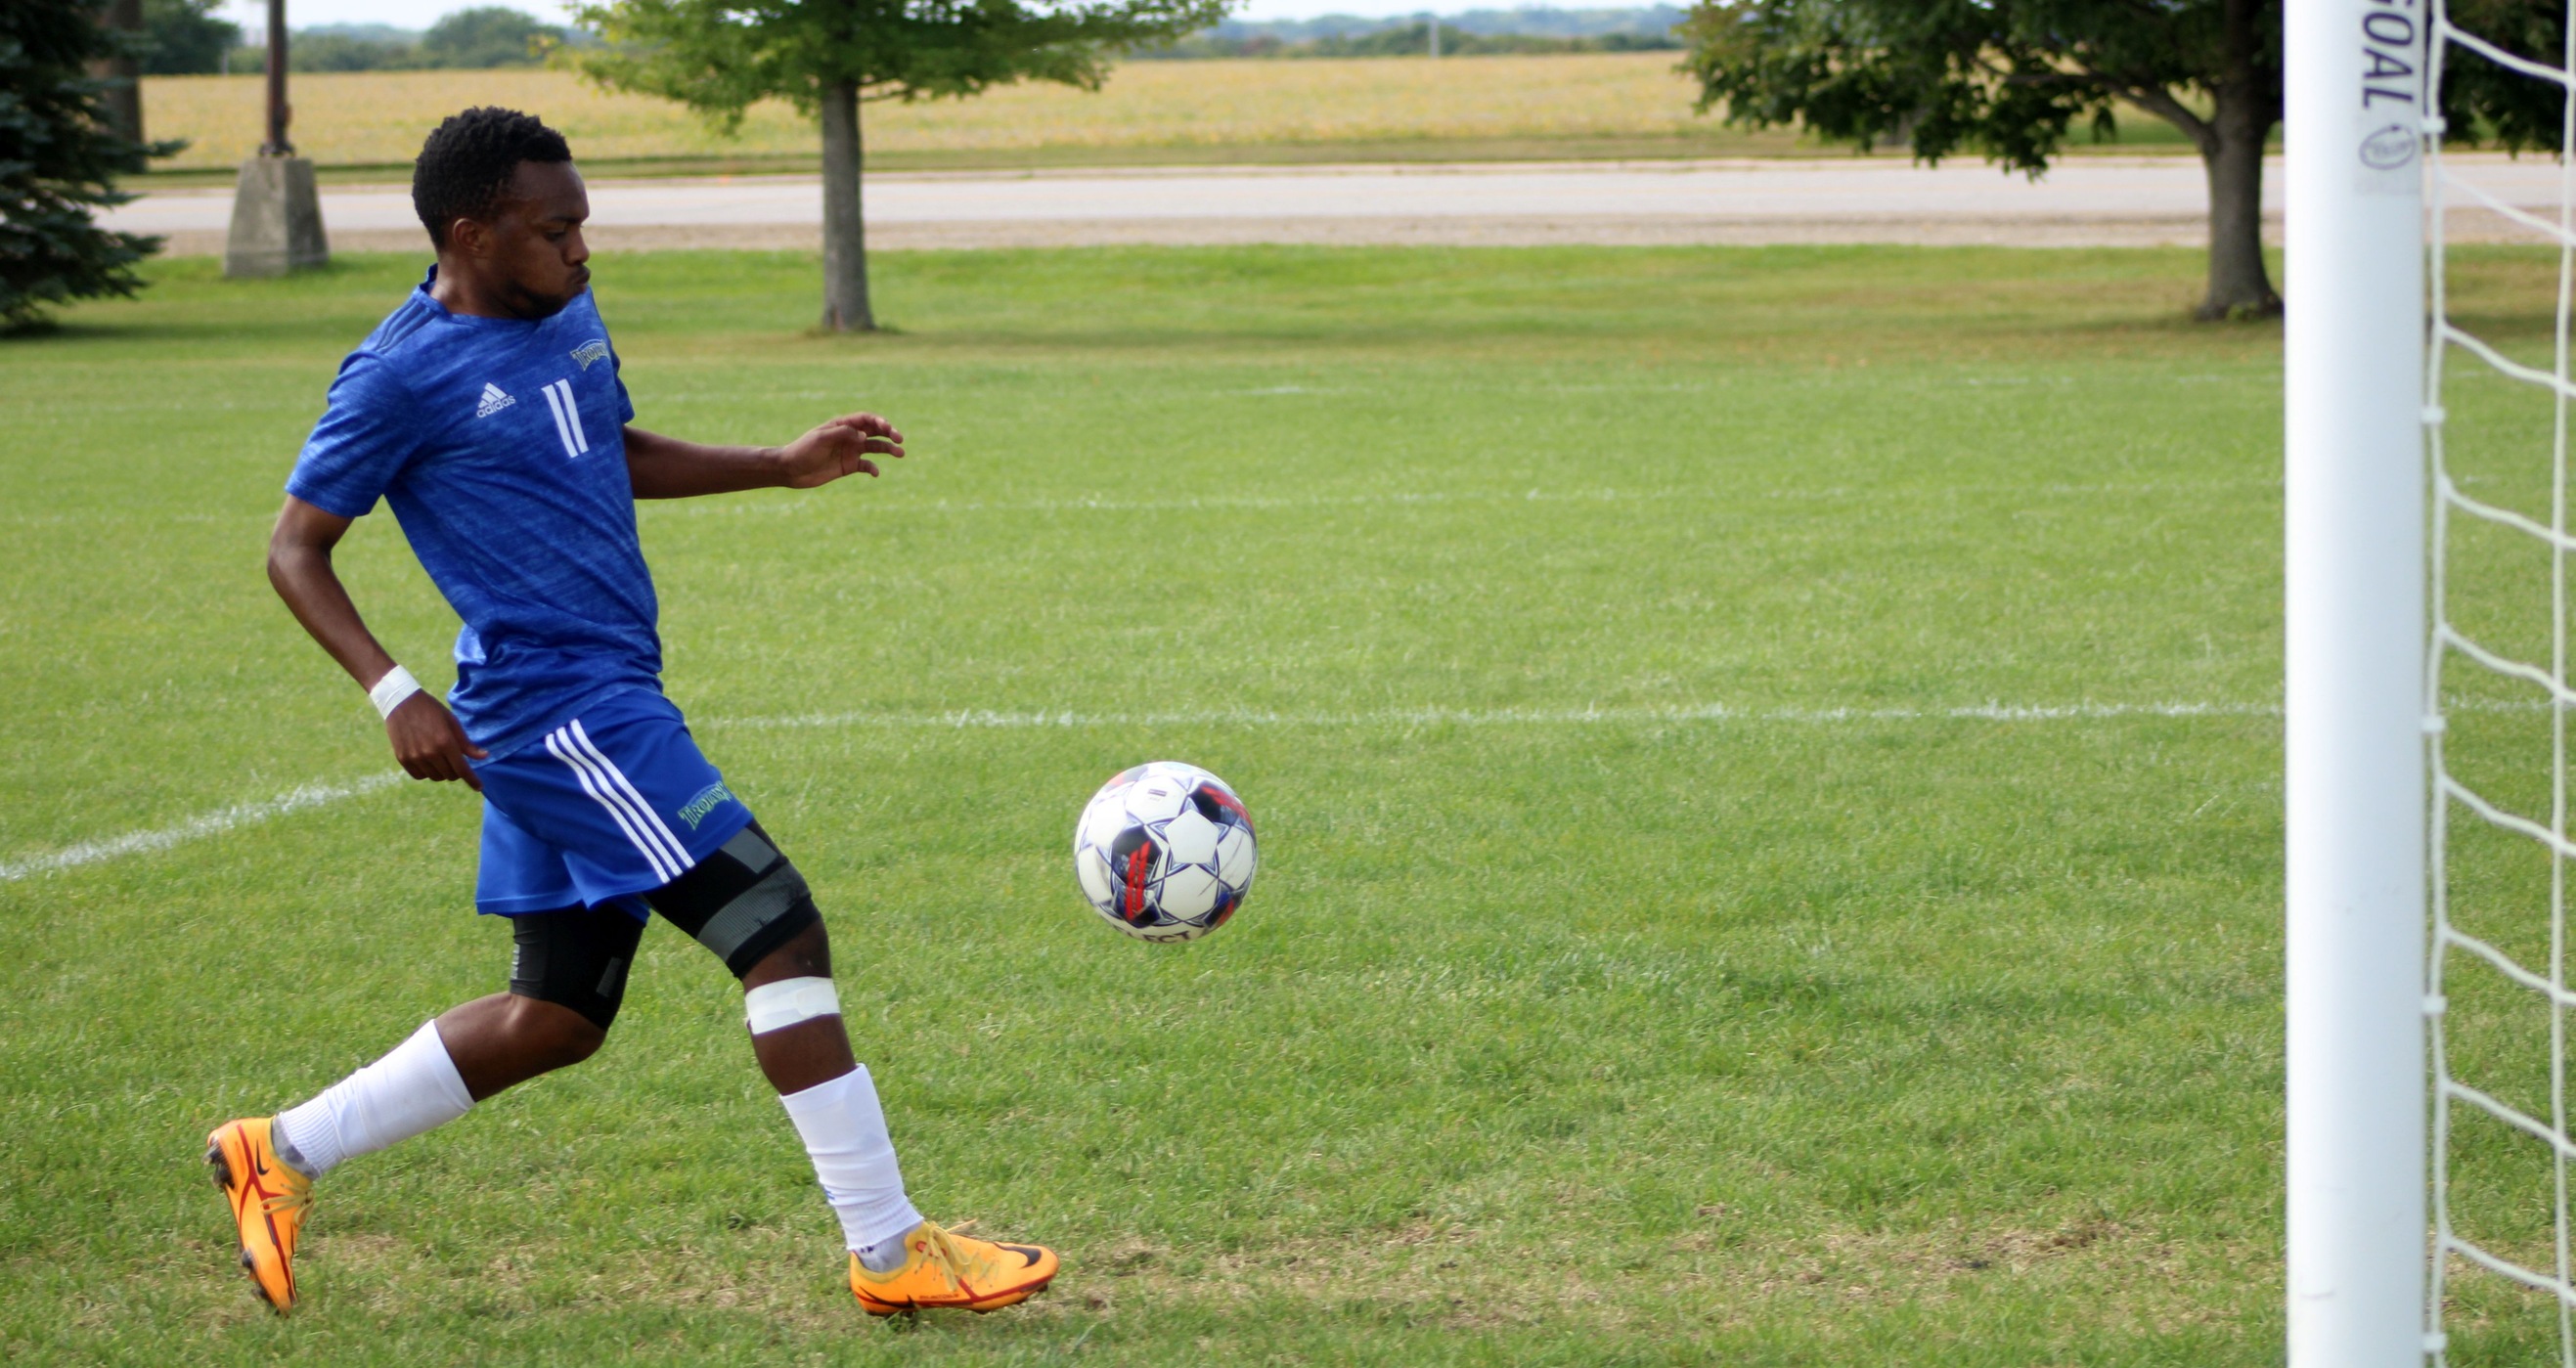 NIACC's Kagiso Madisha gets ready to kick in a goal in the first half of Saturday's match against Scott CC.